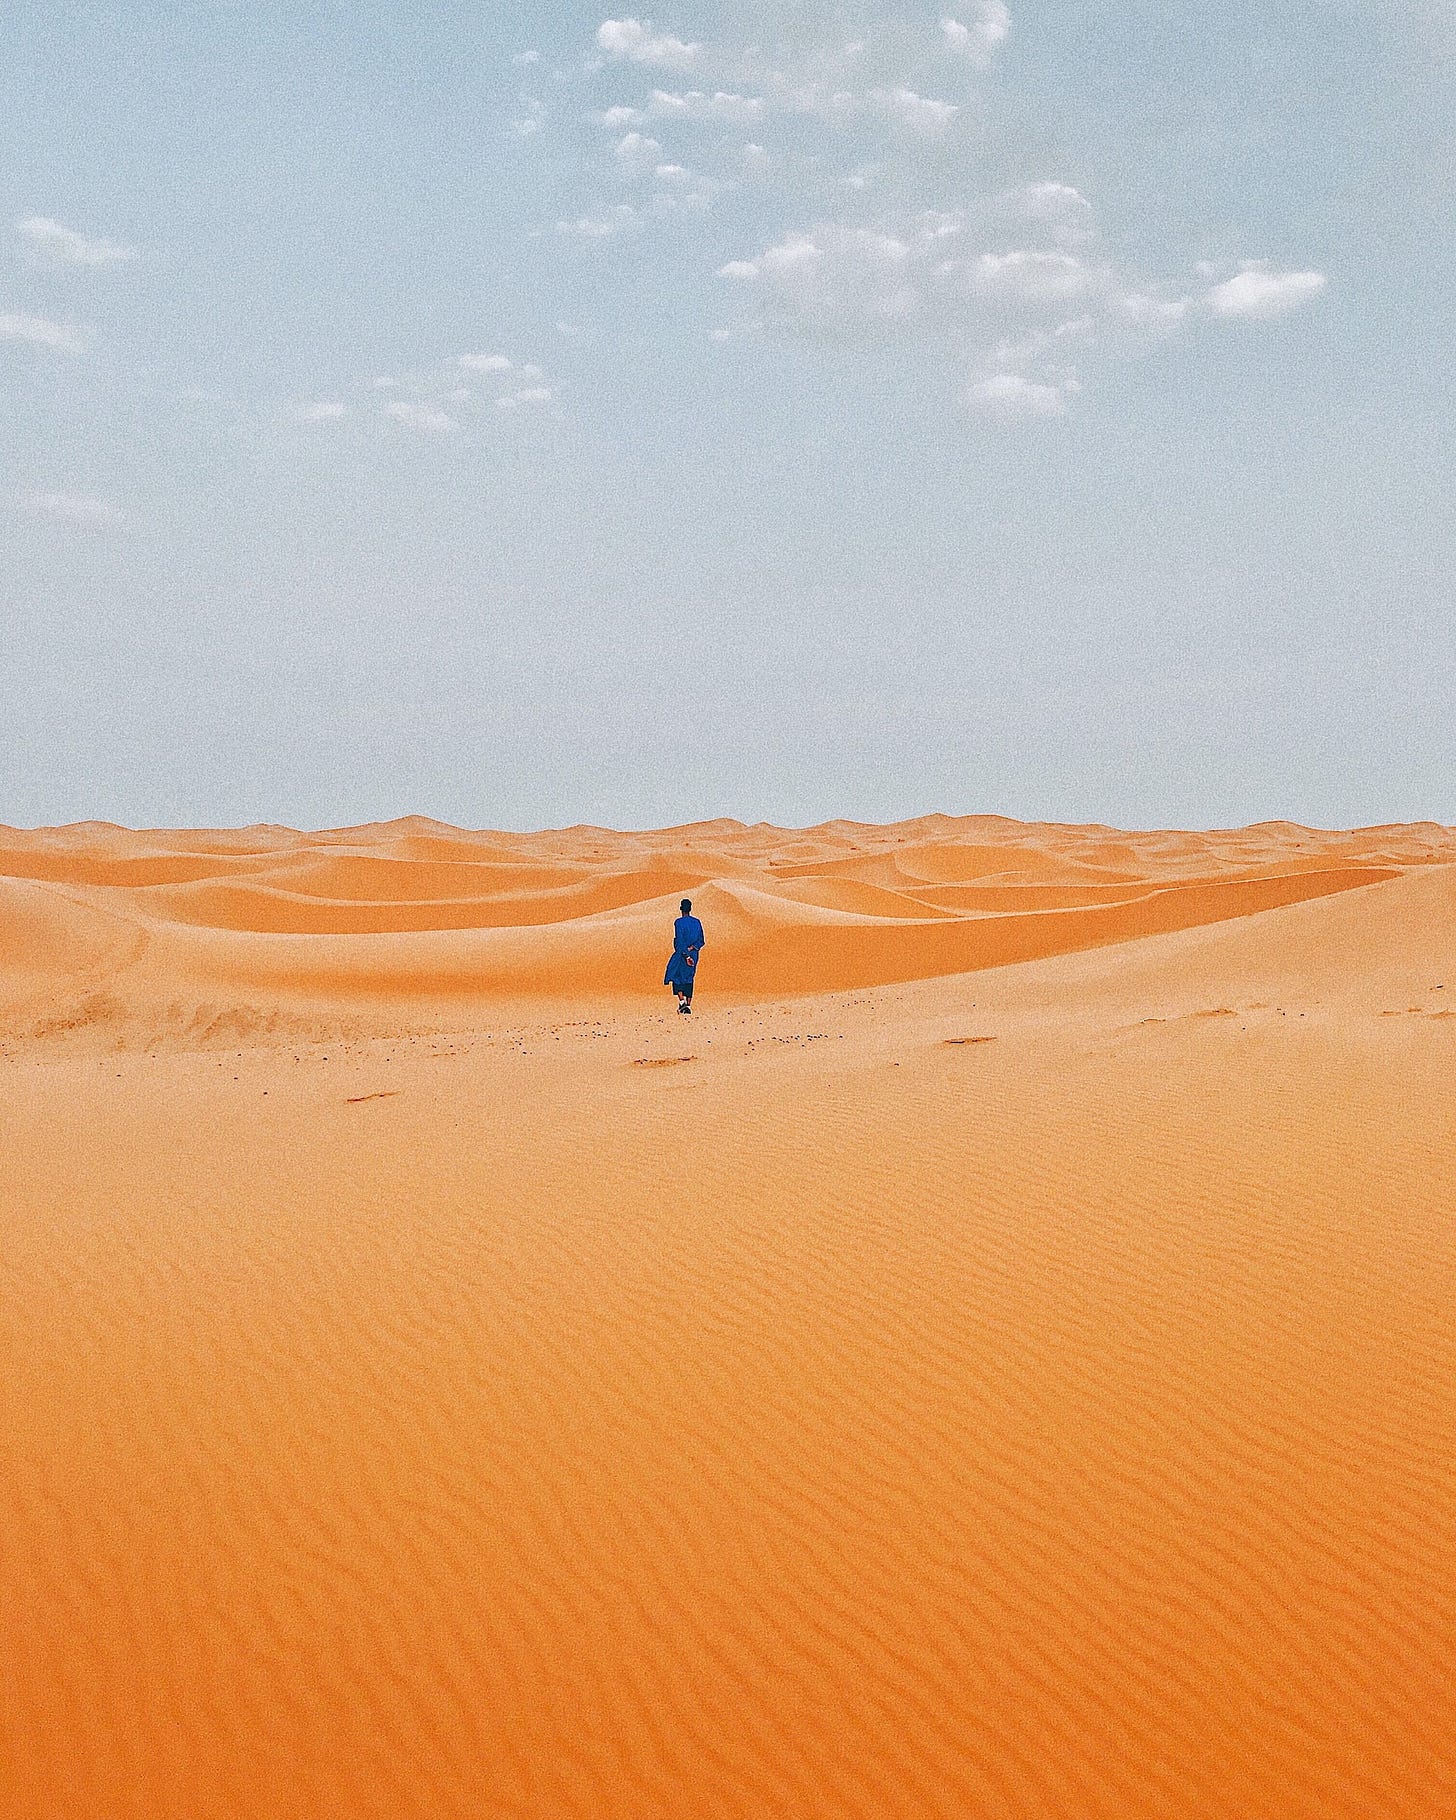 Male human figure striding across wide sand dunes under a clear blue sky